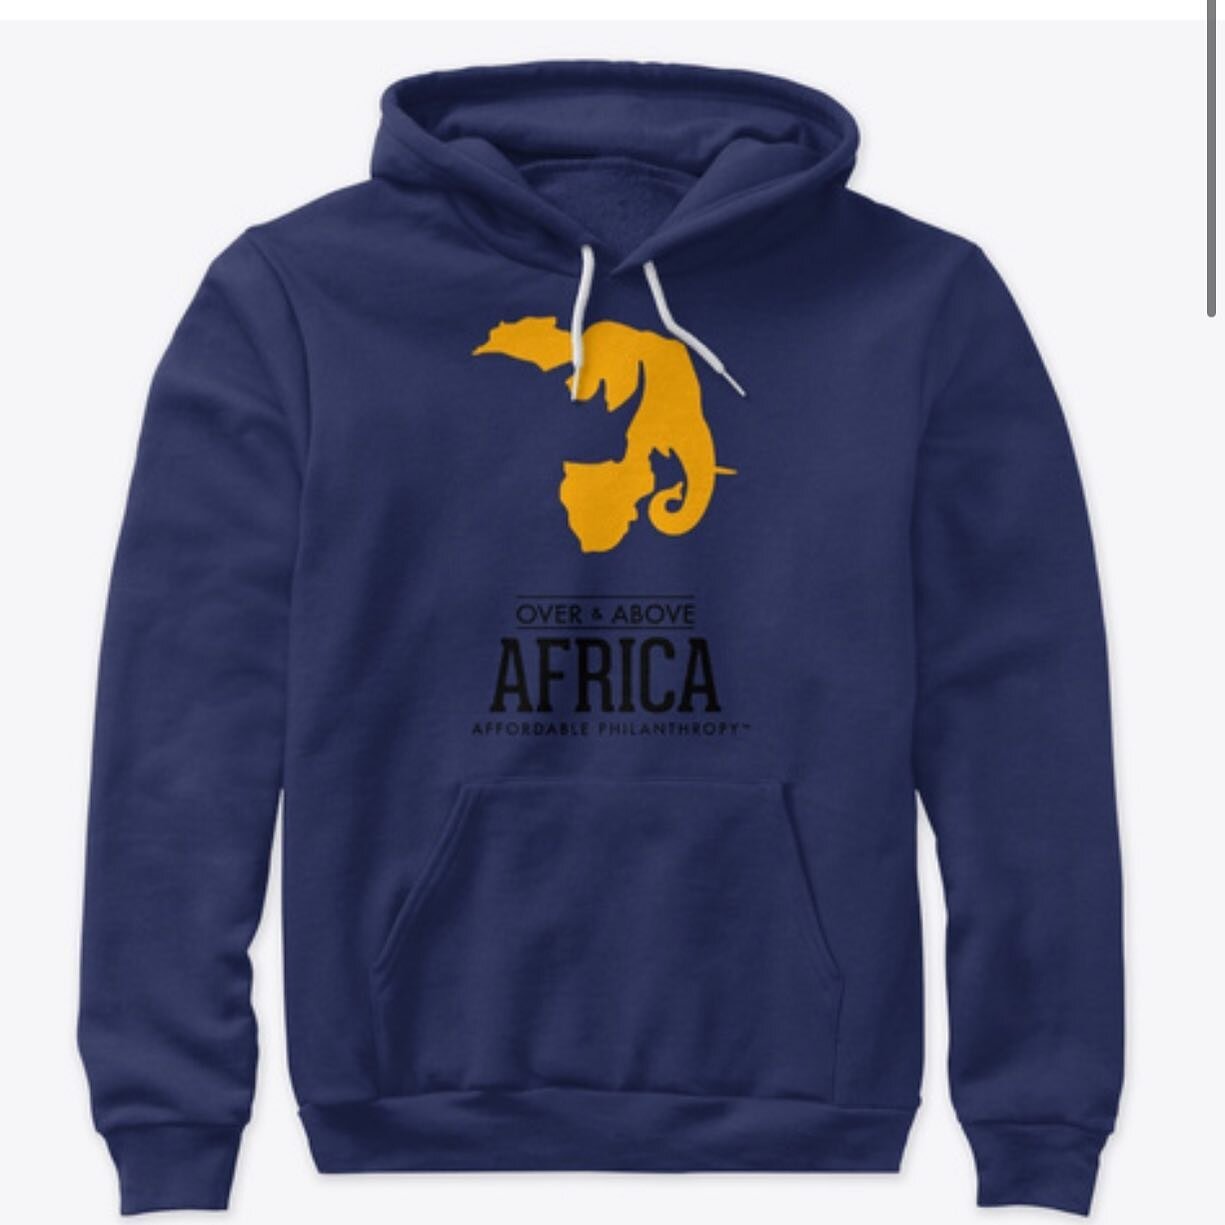 Over and Above Africa merch - the softest, cosiest sweatshirt ... that supports wildlife while keeping you snug! OverAndAboveAfrica.com/shop #wildlife #sweatshirtformen #sweatshirtforwomen #sweatshirtforgirls #sweatshirtforboys  #donate